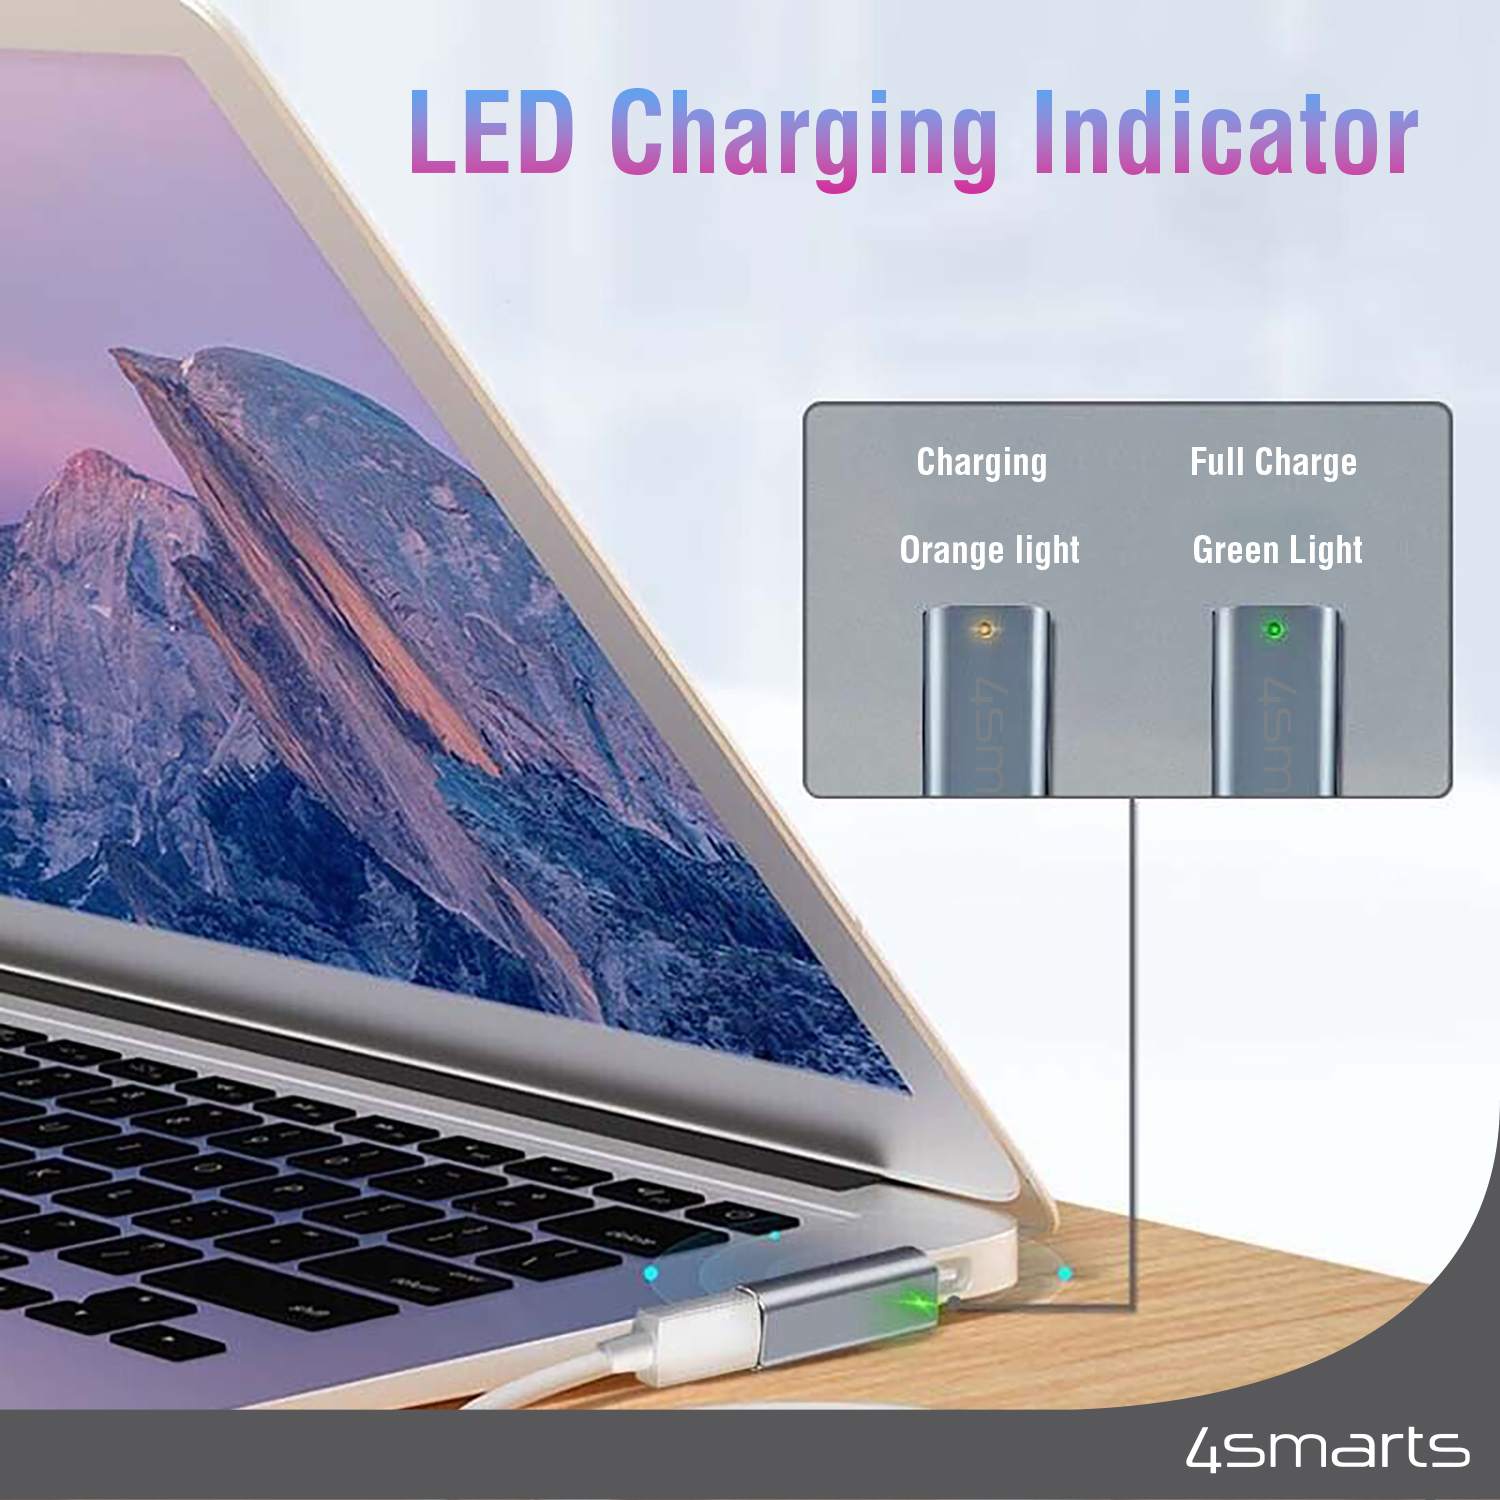 The 4smarts adapter USB-C PD 100W to MagSafe 2 is equipped with an LED indicator that flashes orange when the device is charging and lights up green when the device is fully charged.